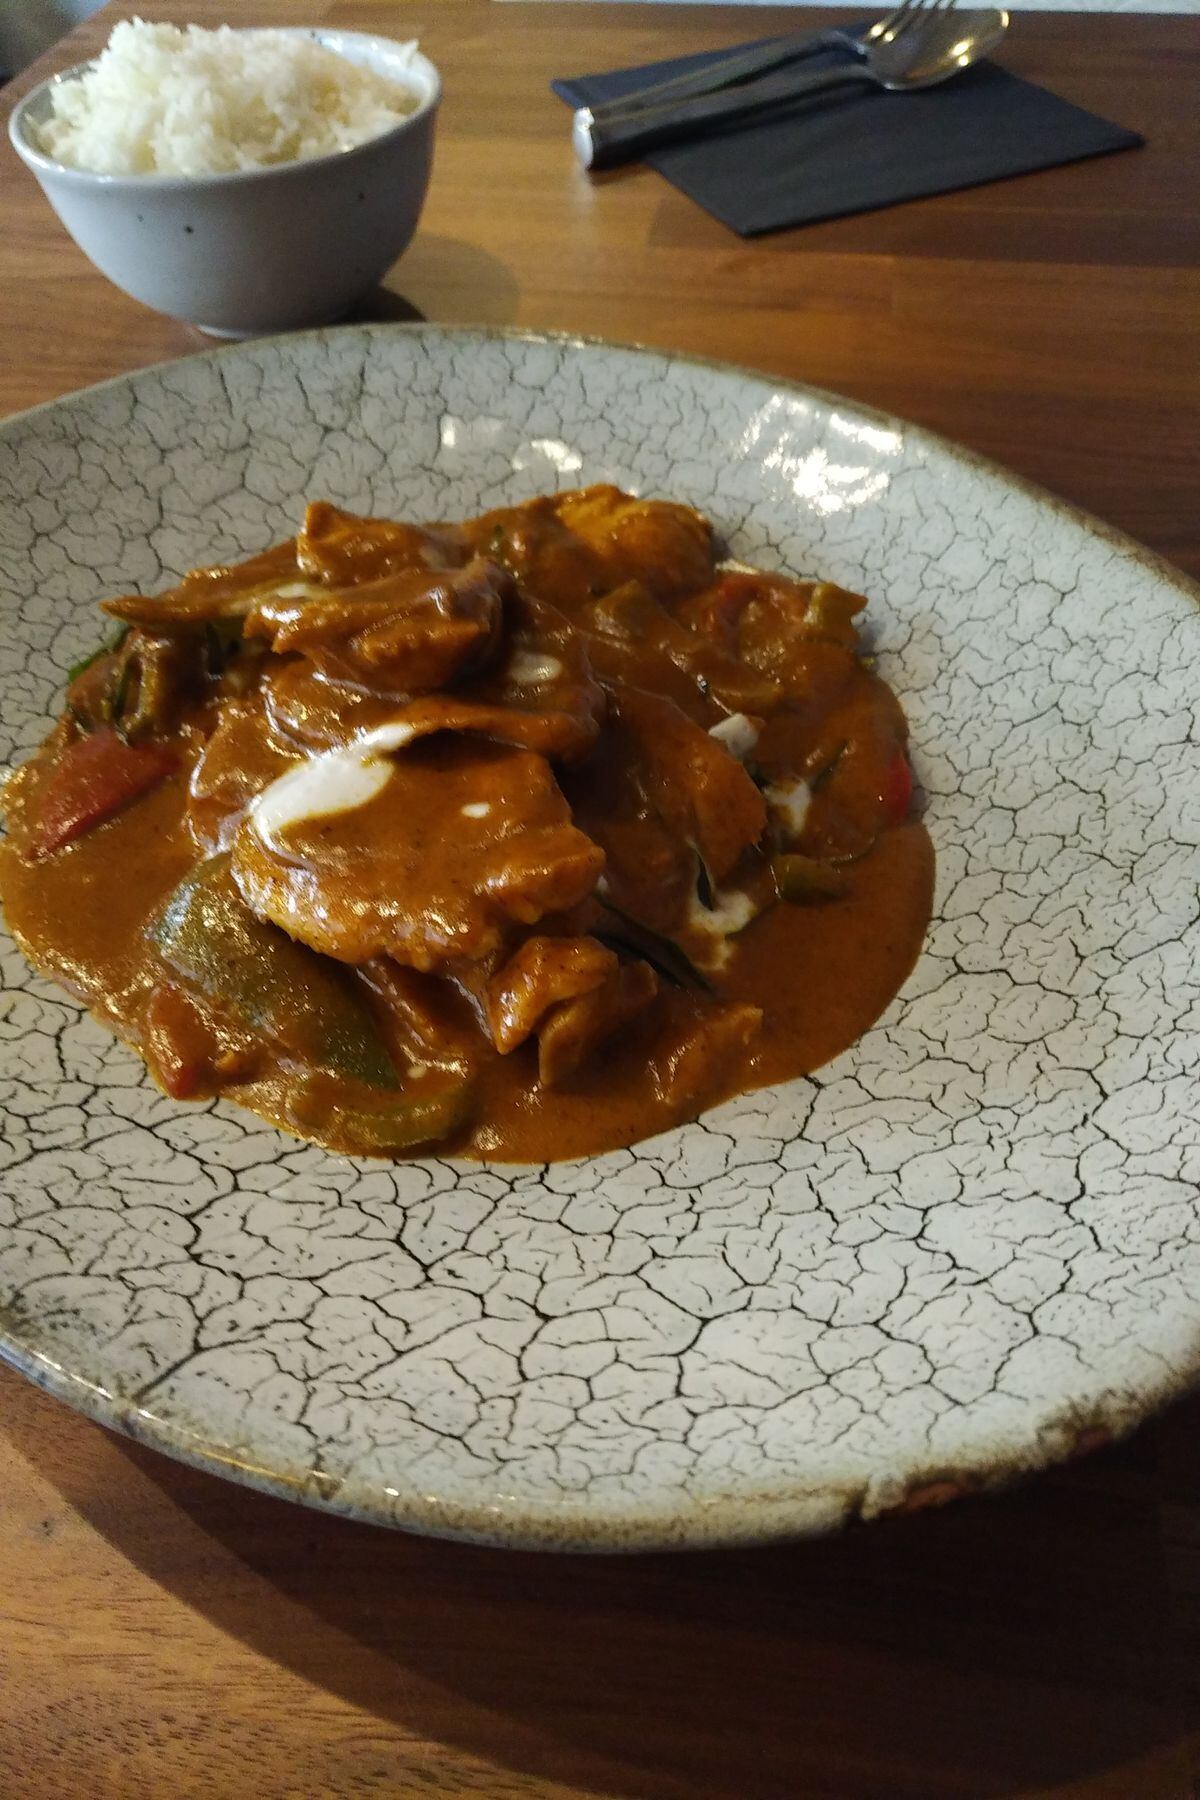 Panang curry, with chicken and rice